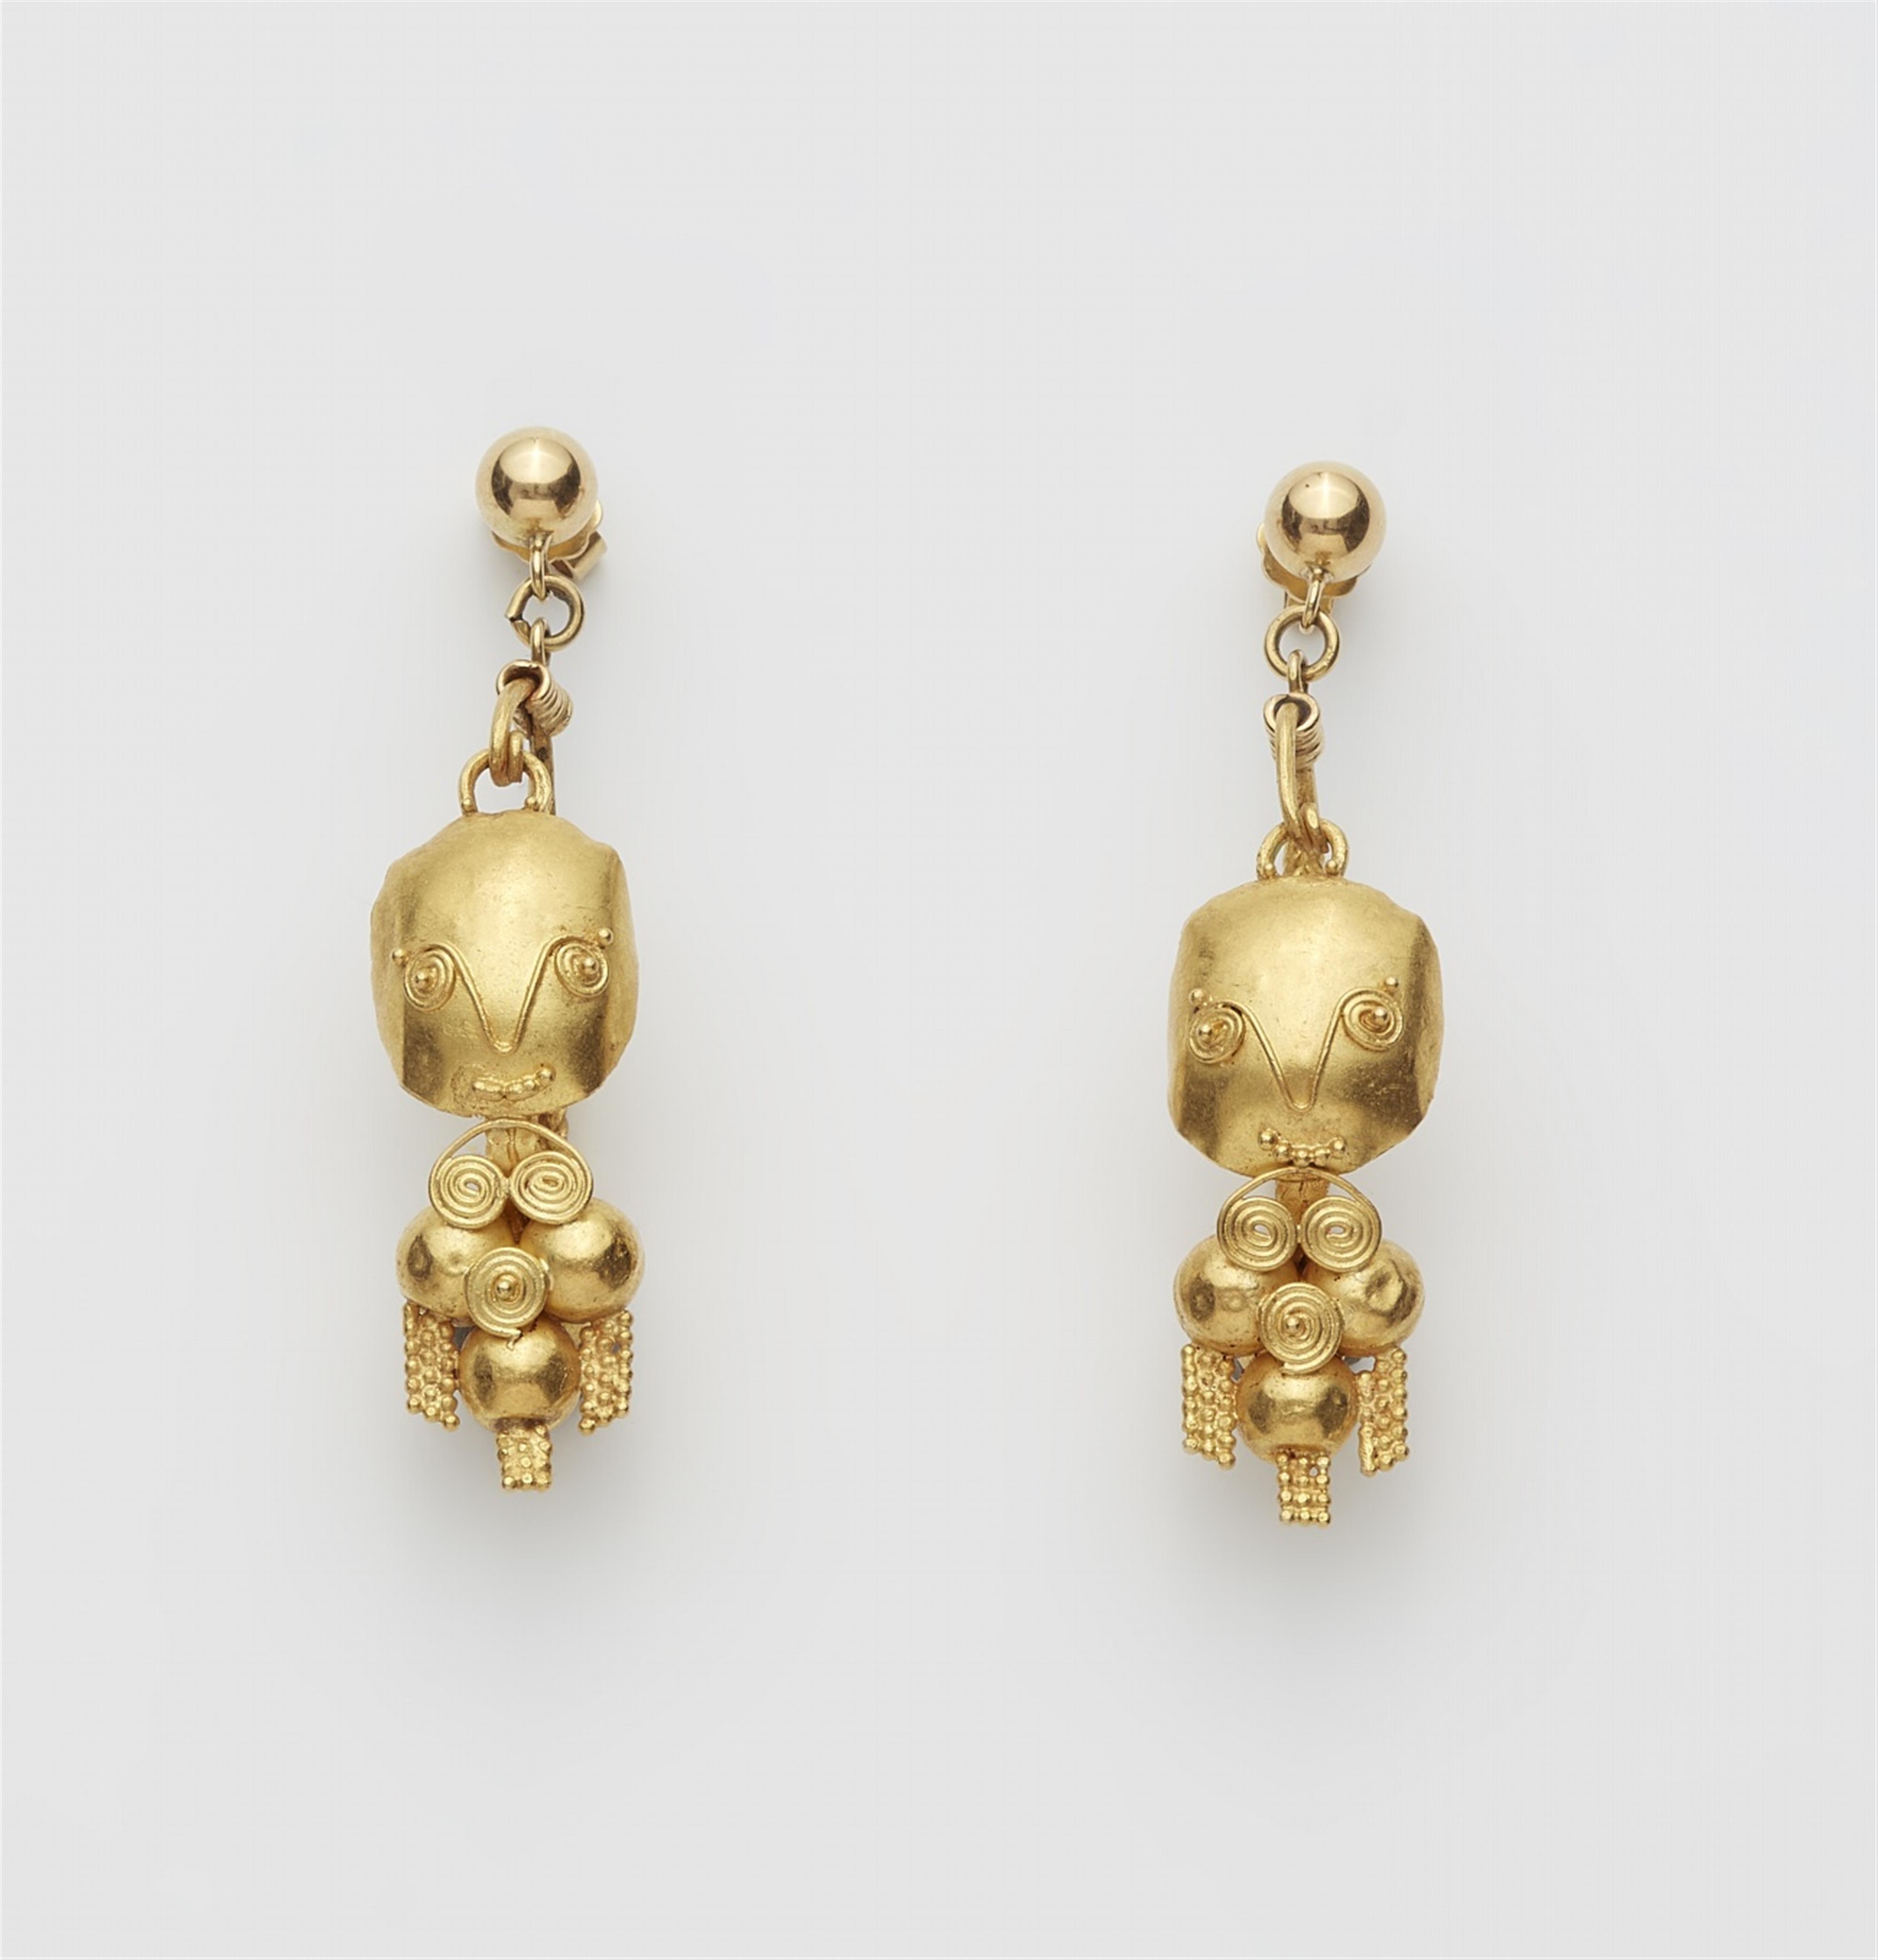 A pair of 22k gold drop earrings in the Antique revival style - image-1